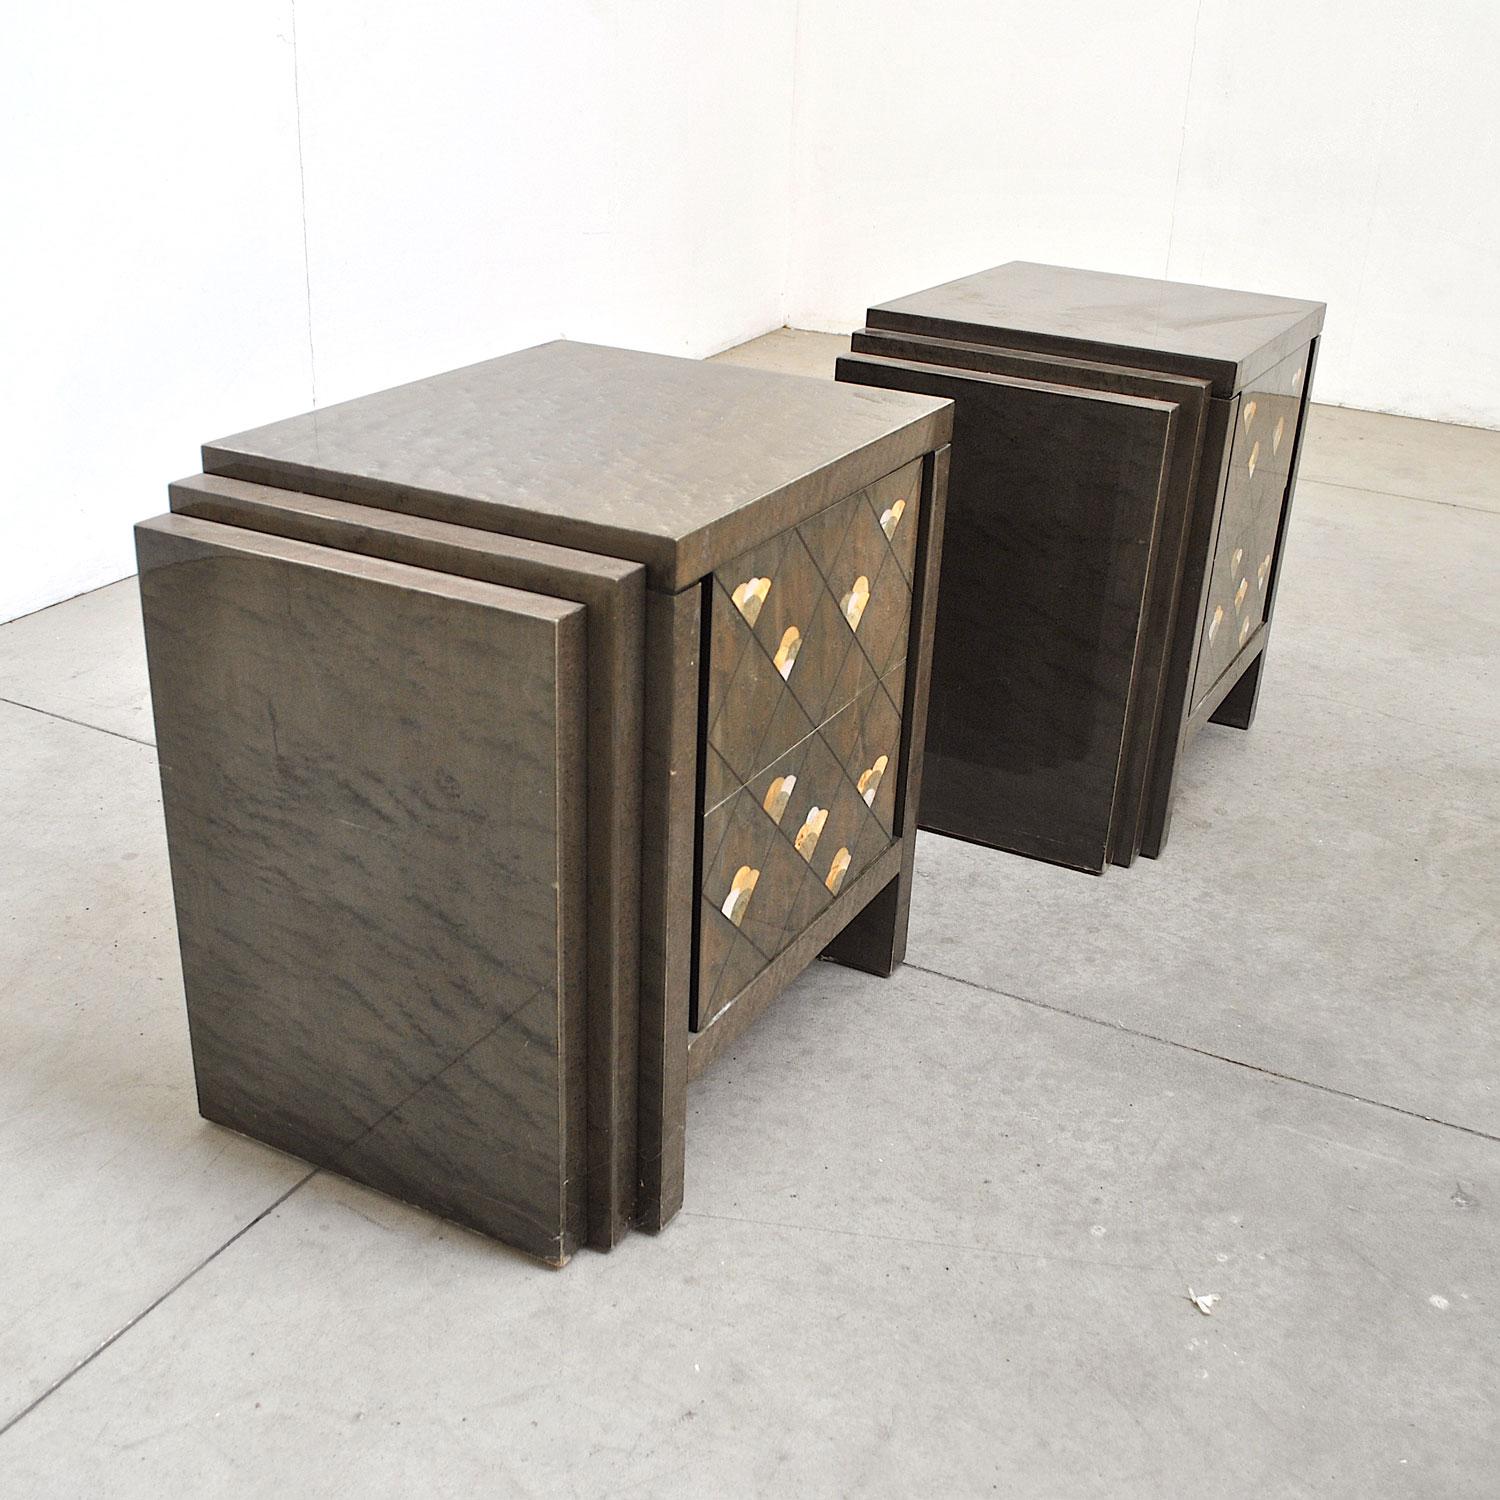 Luciano Frigerio Italian Midcentury Nightstands, Late 1970s For Sale 1